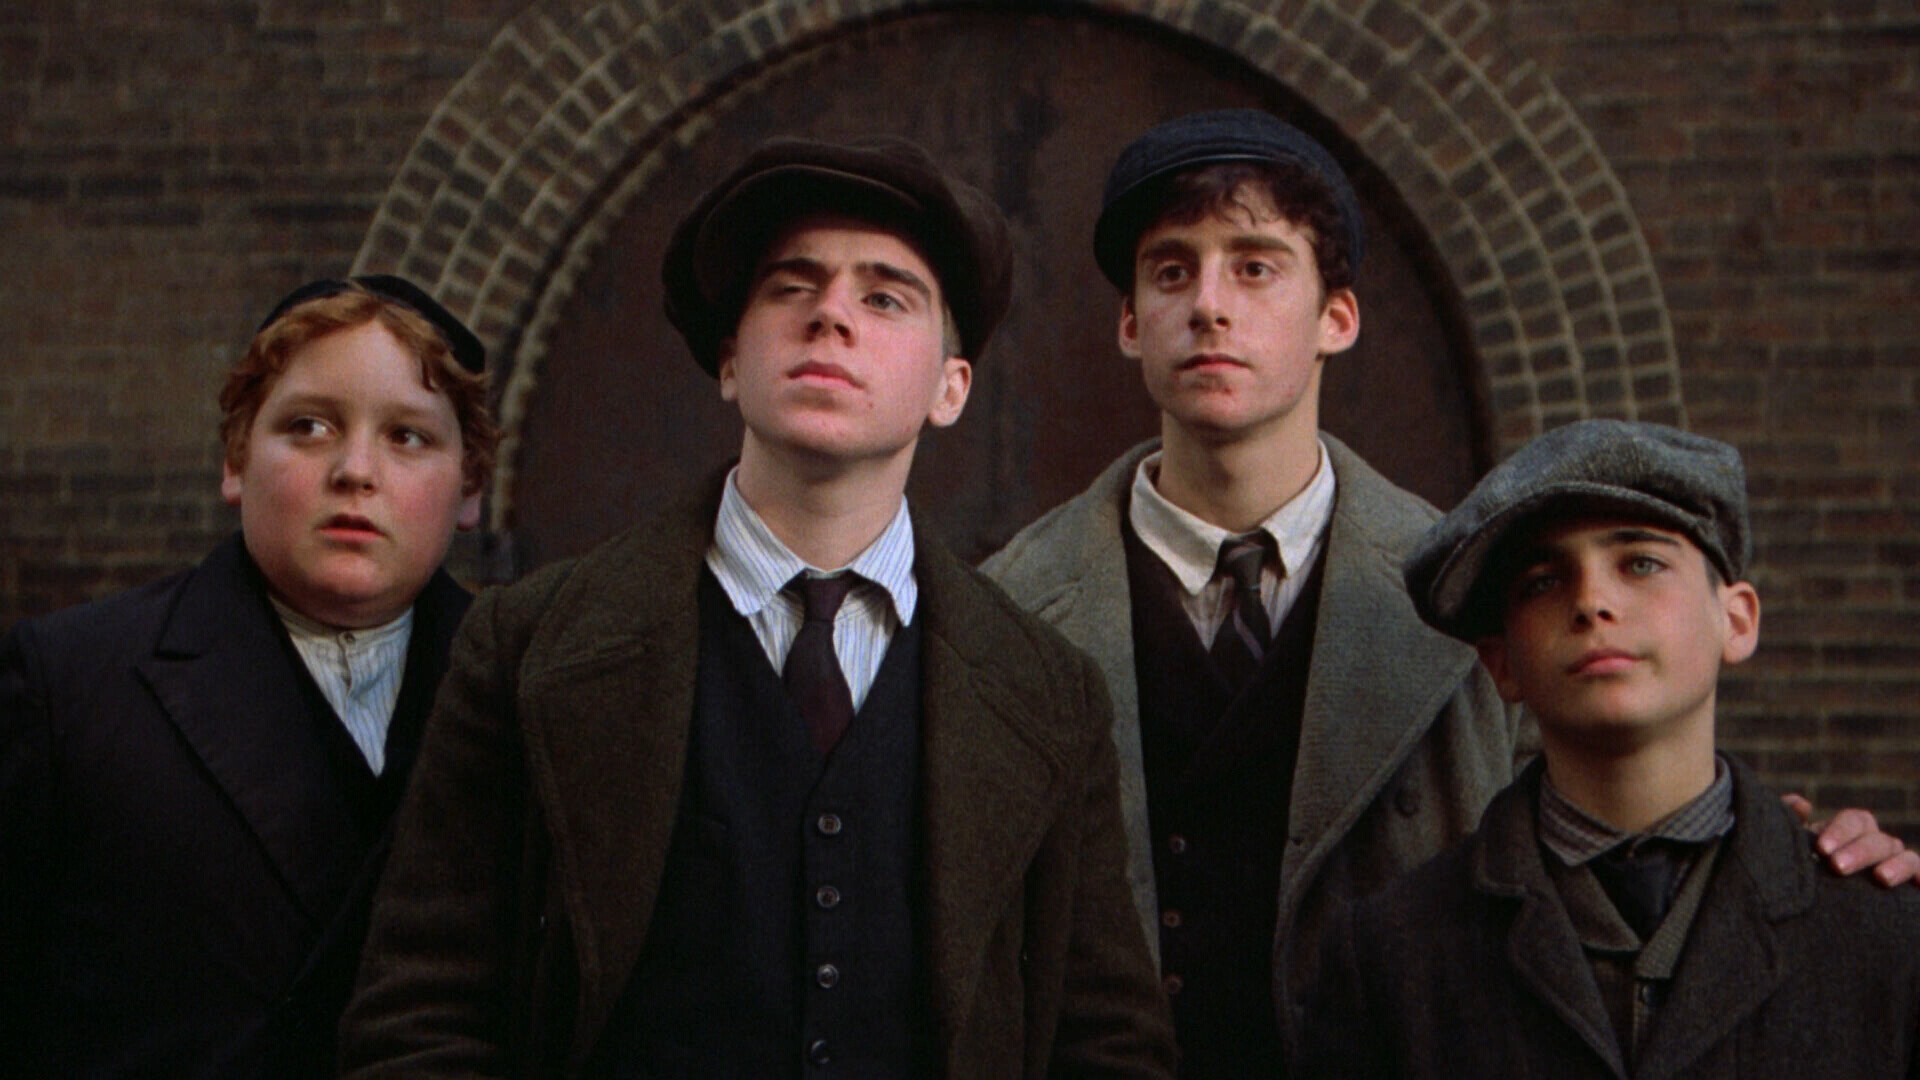 Once Upon a Time in America: Mike Monetti, Adrian Curran, Brian Bloom, and Rusty Jacobs. 1920x1080 Full HD Wallpaper.